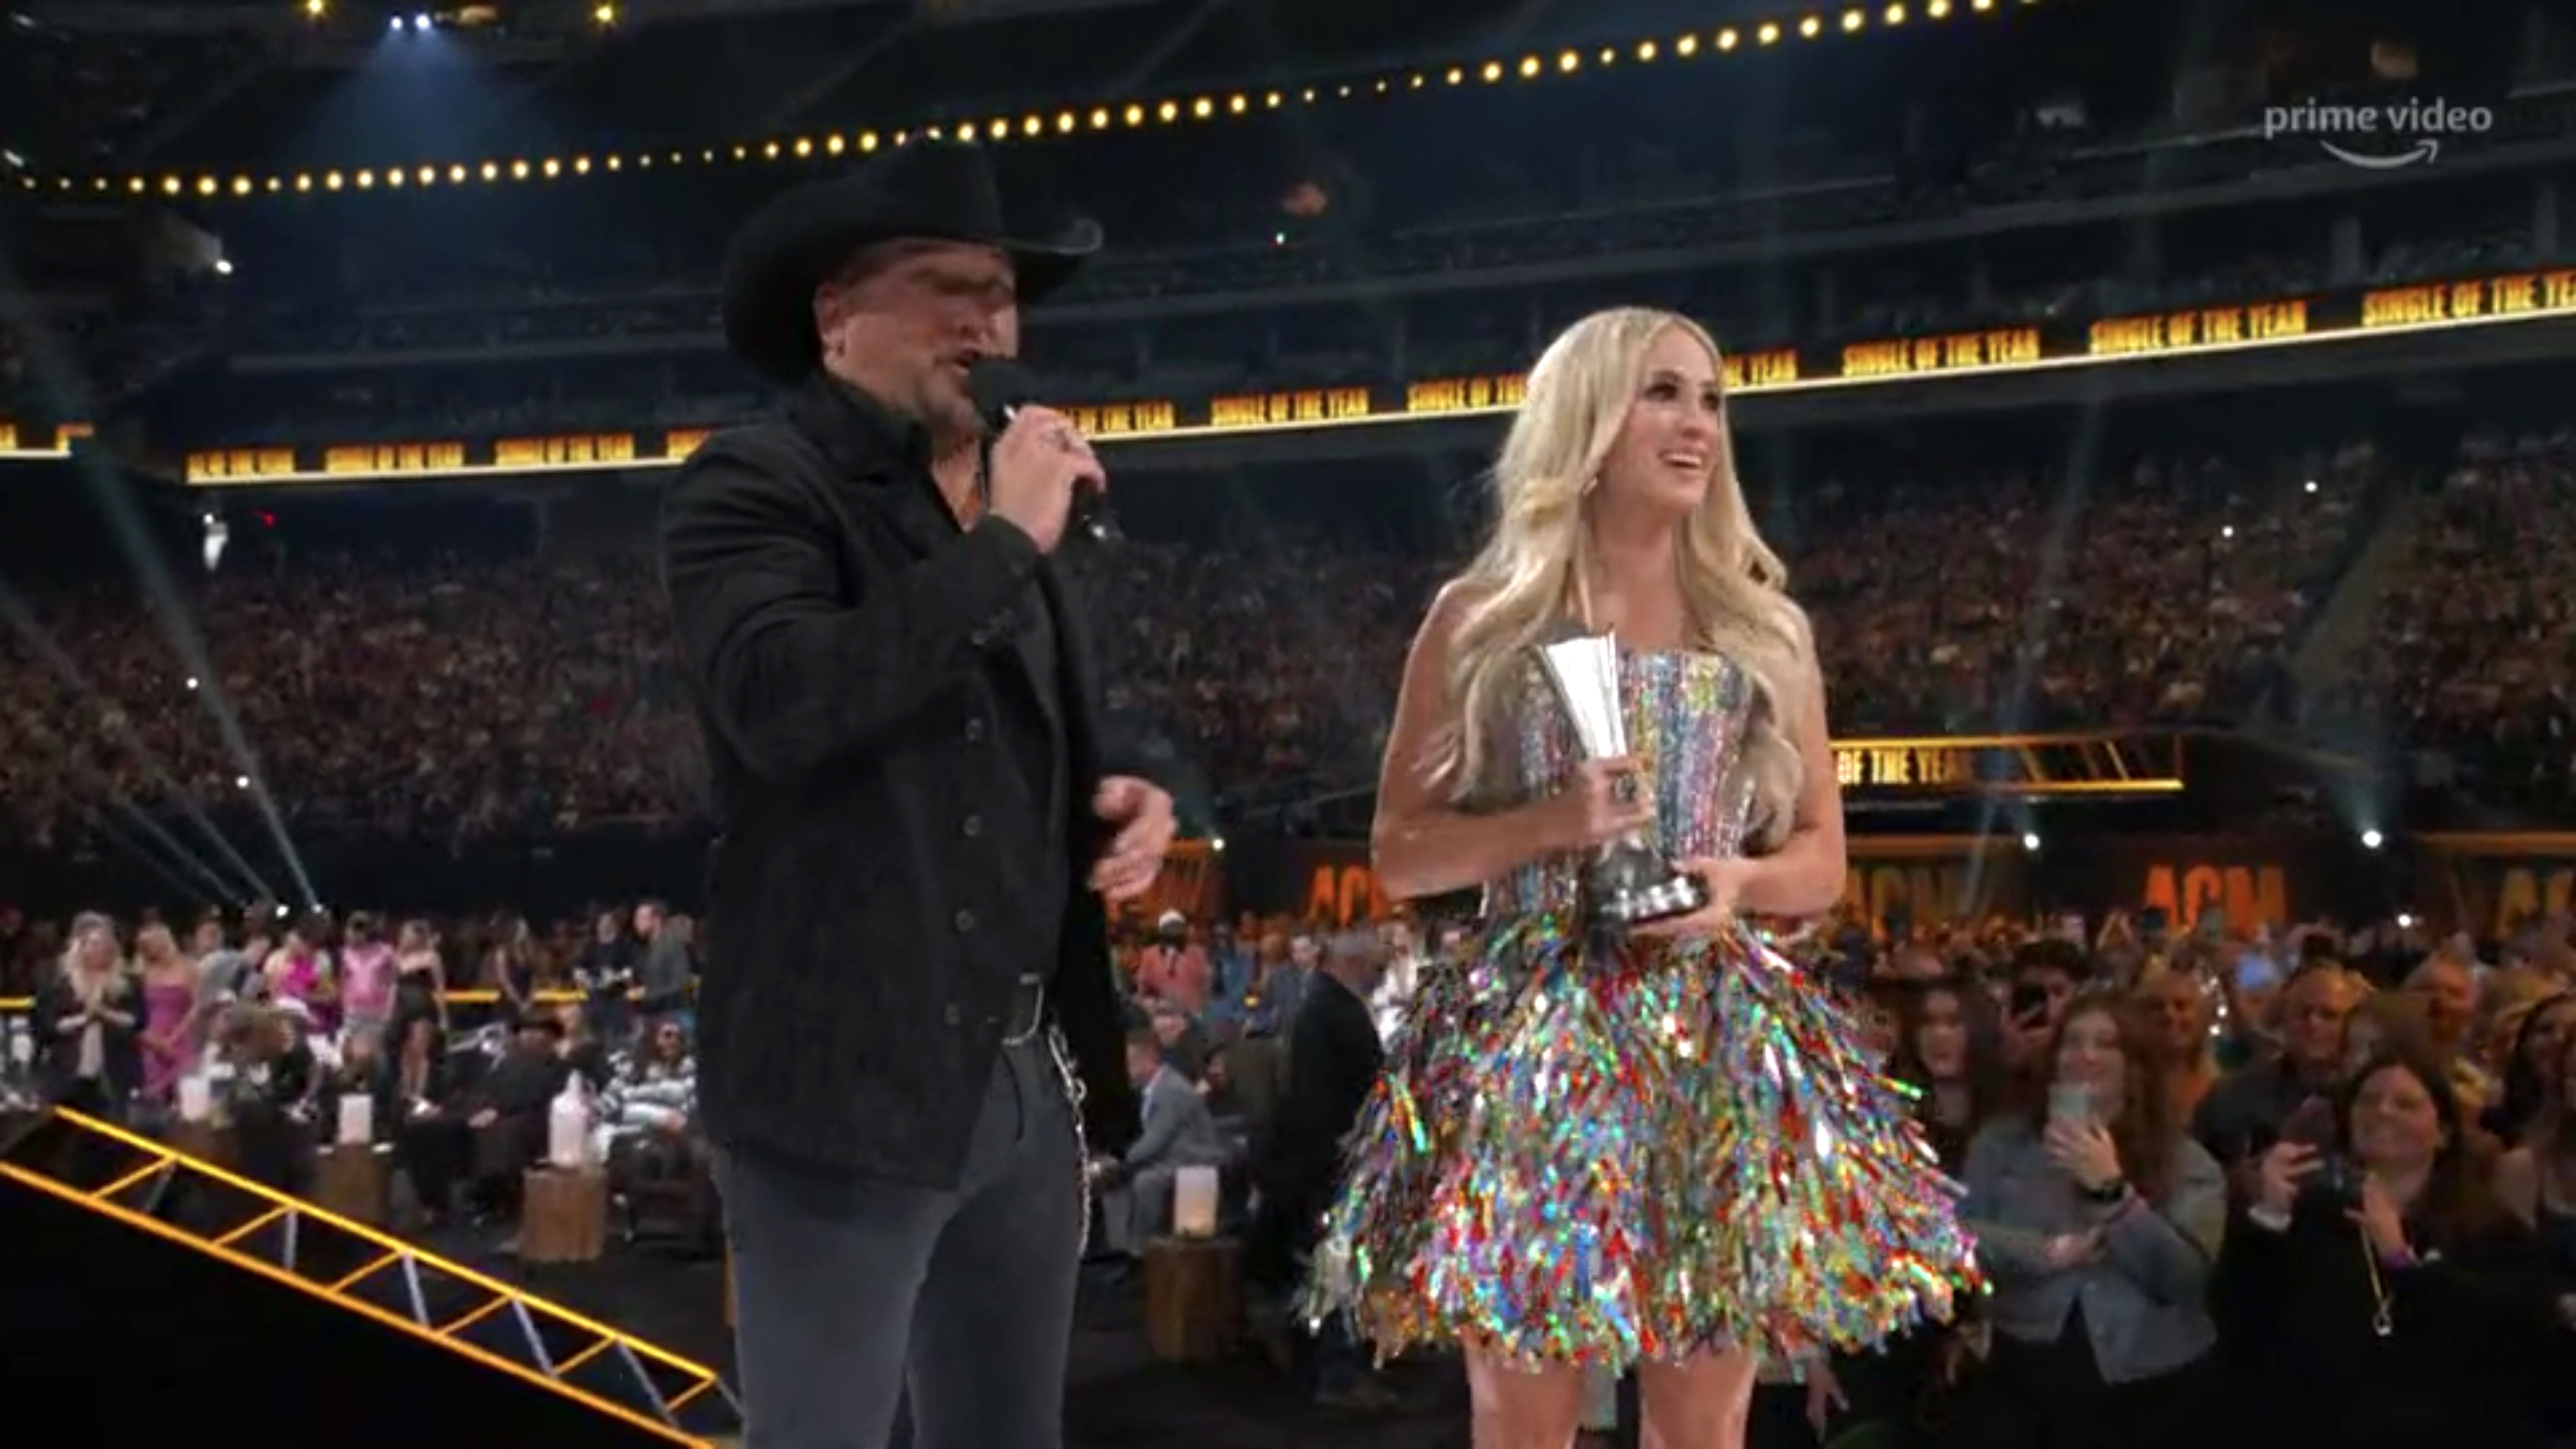 Carrie Underwood Stuns on the 2022 ACM Awards' Red Carpet in Mini